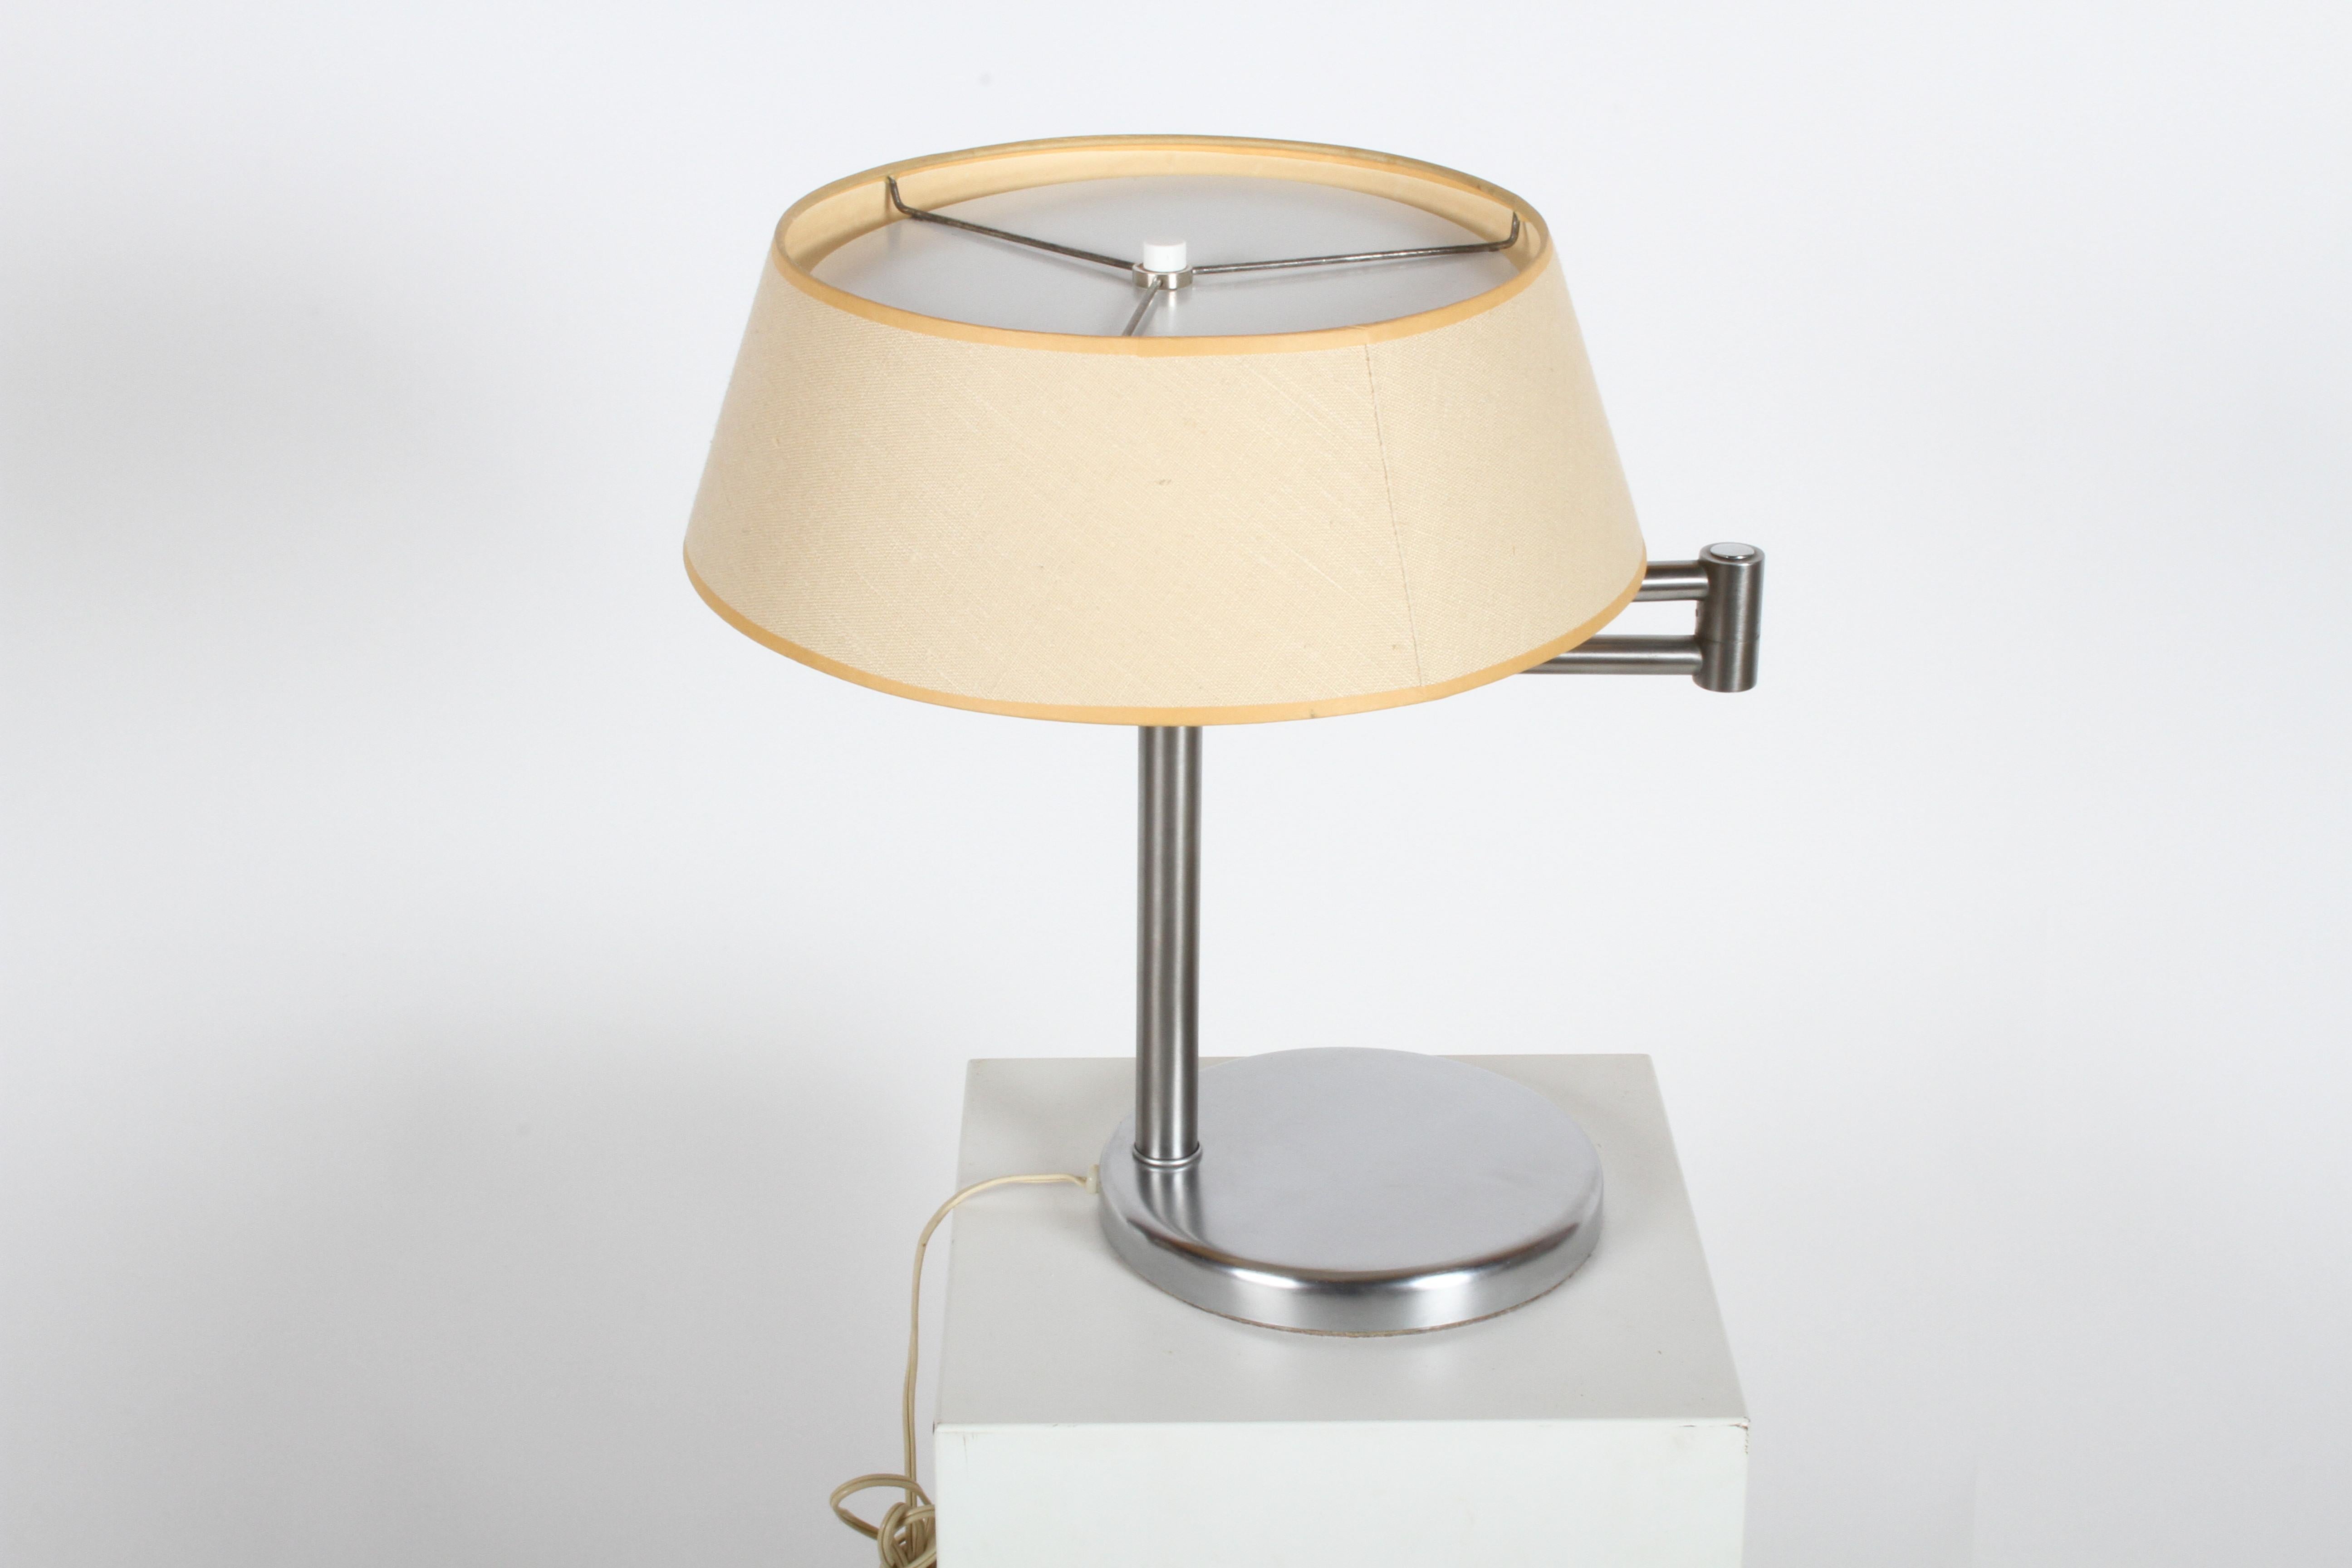 Listed is Walter Von Nessen's most famous lamp, which he designed in 1930s. This swing-arm Classic in brushed nickel is in very nice condition, and production date is sometime in the late 1950s. Has original linen shade, white reflector disc, and S